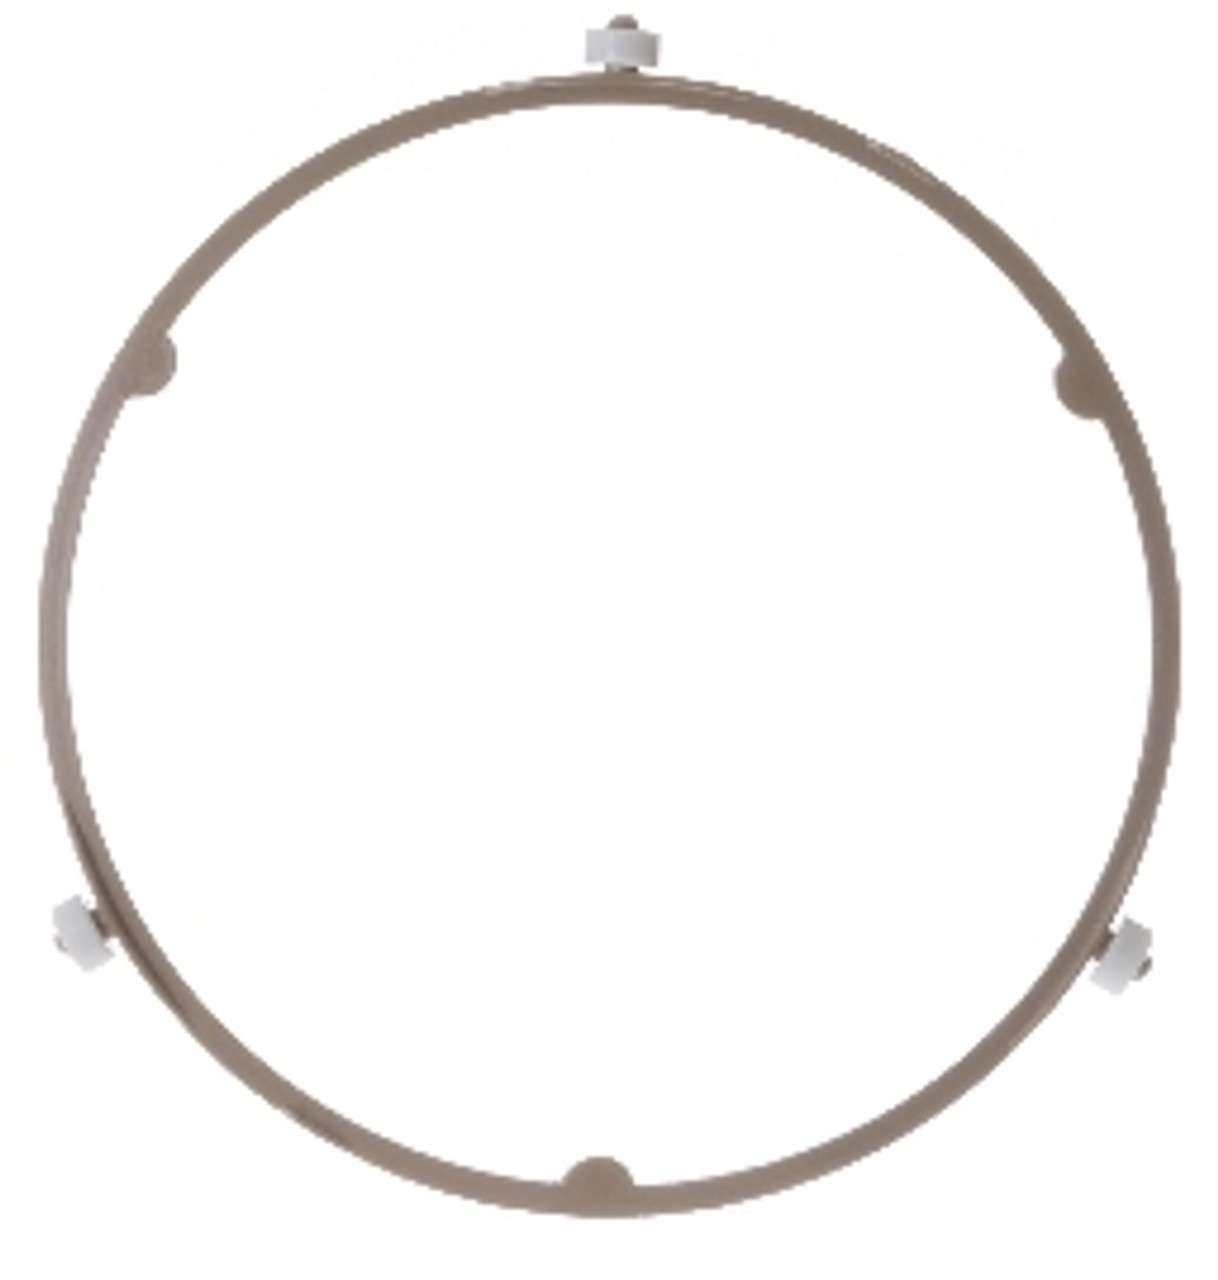 An image of a GE Appliances WB06X10139 MICROWAVE TURNTABLE